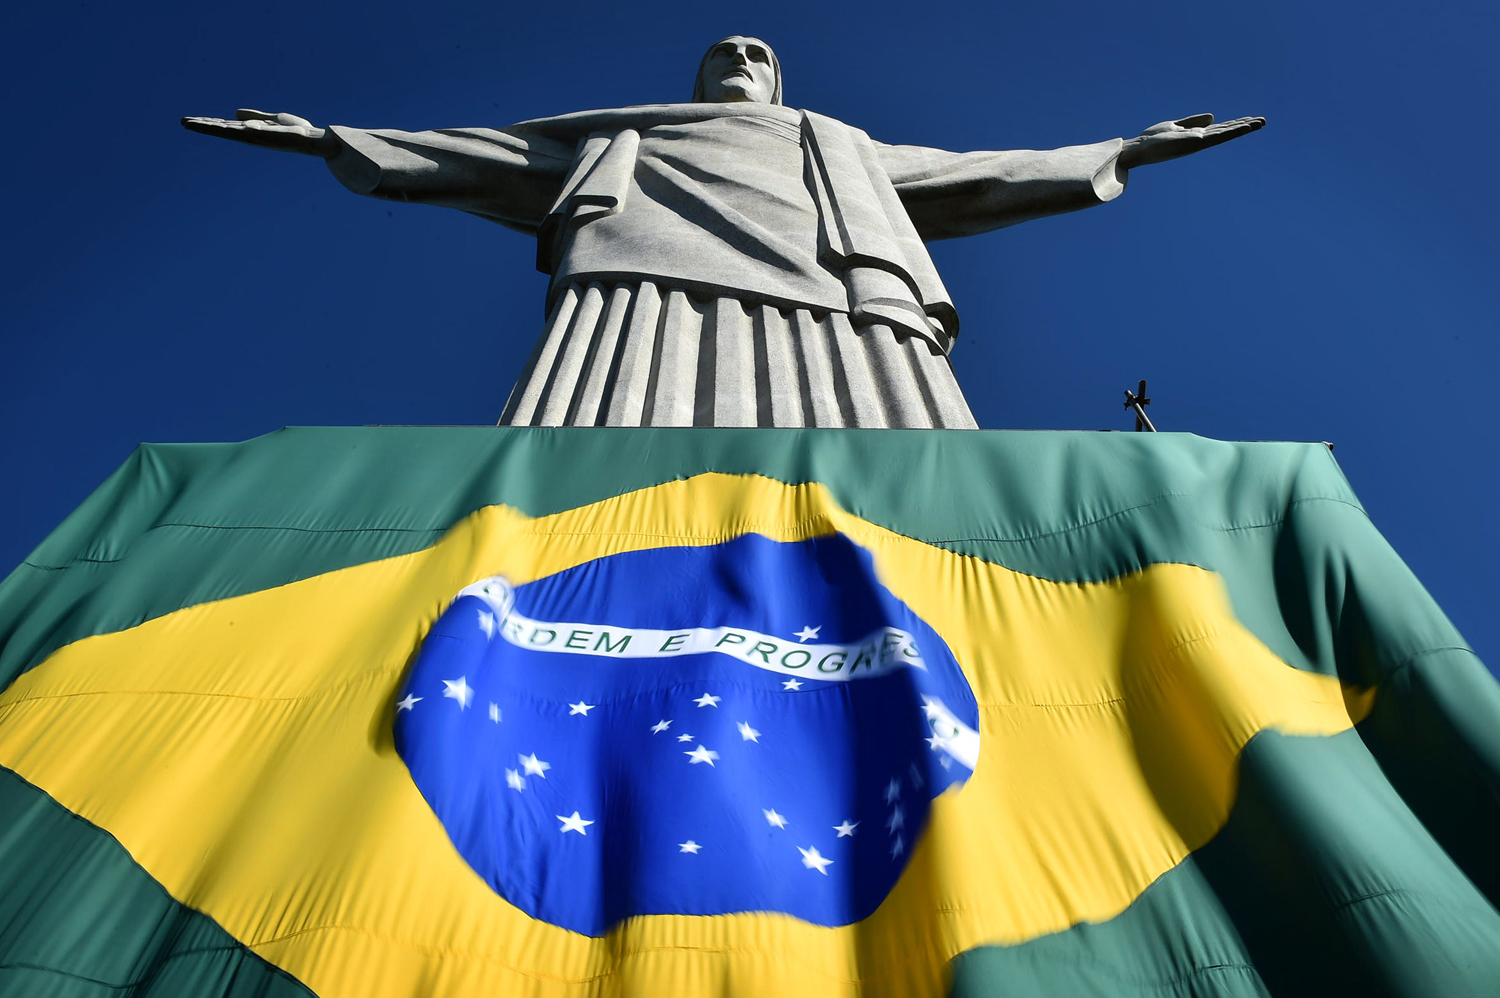 The Brazilian flag is seen at the base of the statue of the Christ the Redeemer on top of Corcovado hill in Rio de Janeiro, Brazil, on June 12, 2014